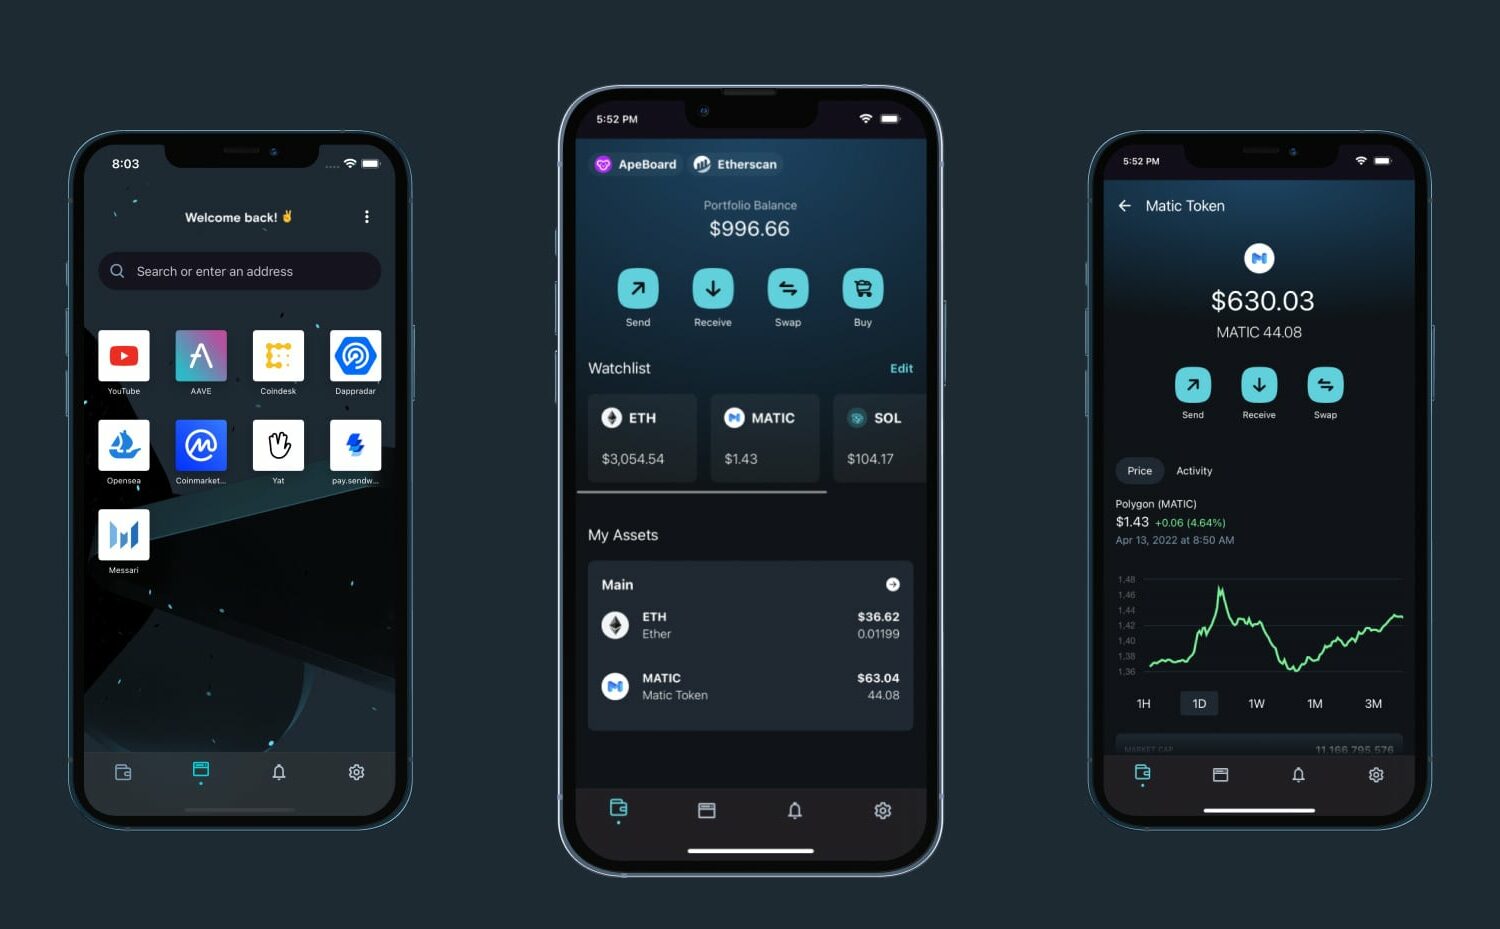 Marketing image showcasing Opera Software's Crypto Browser on iPhone with an integrated native non-custodial crypto wallet and easy access to Web3 apps